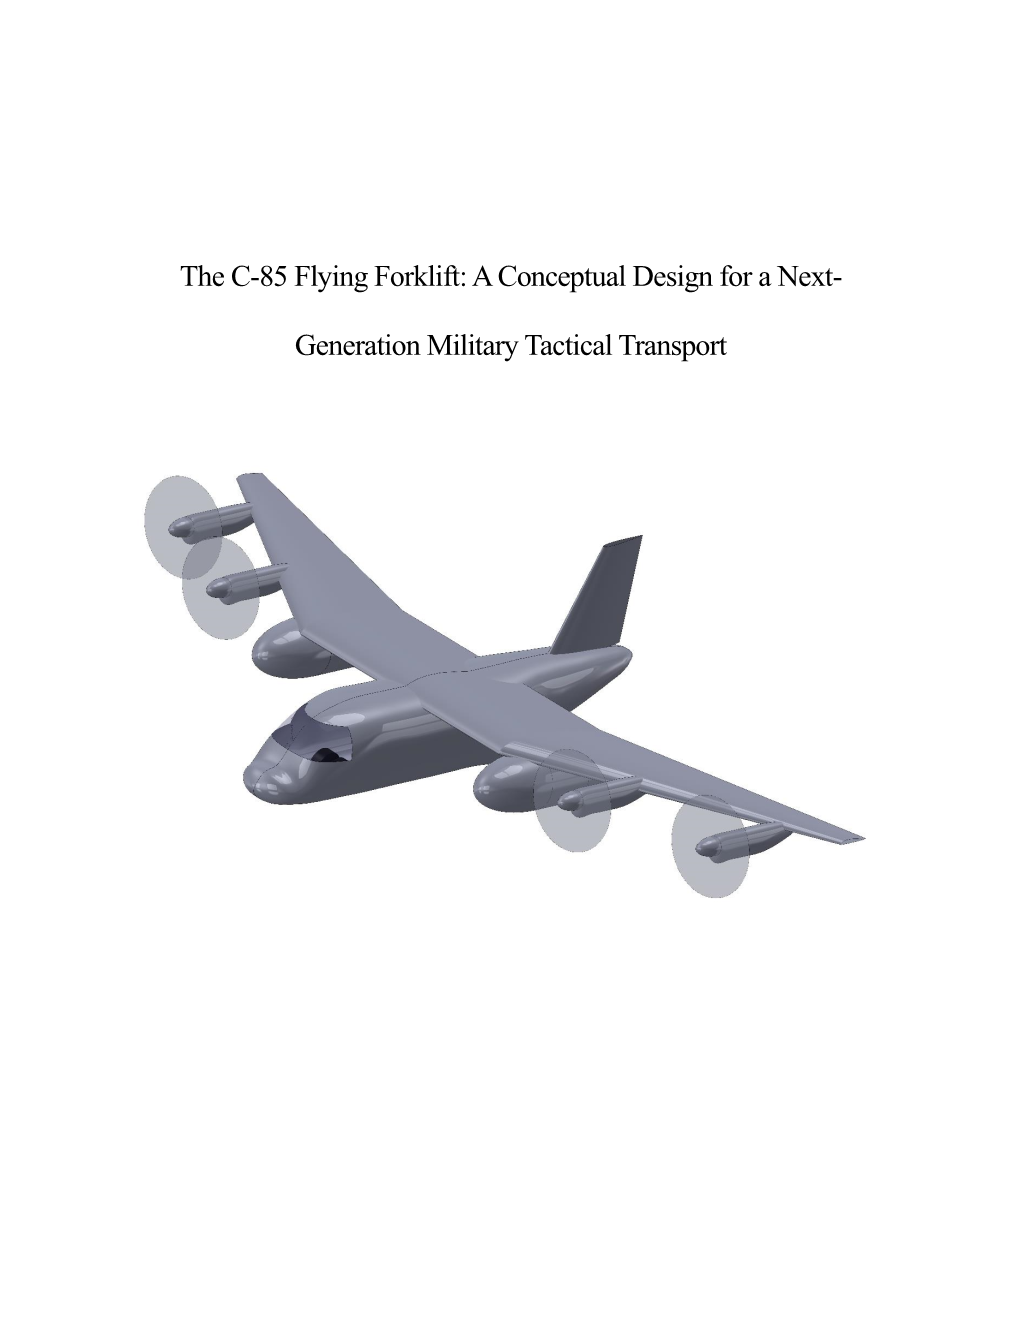 The C-85 Flying Forklift: a Conceptual Design for a Next